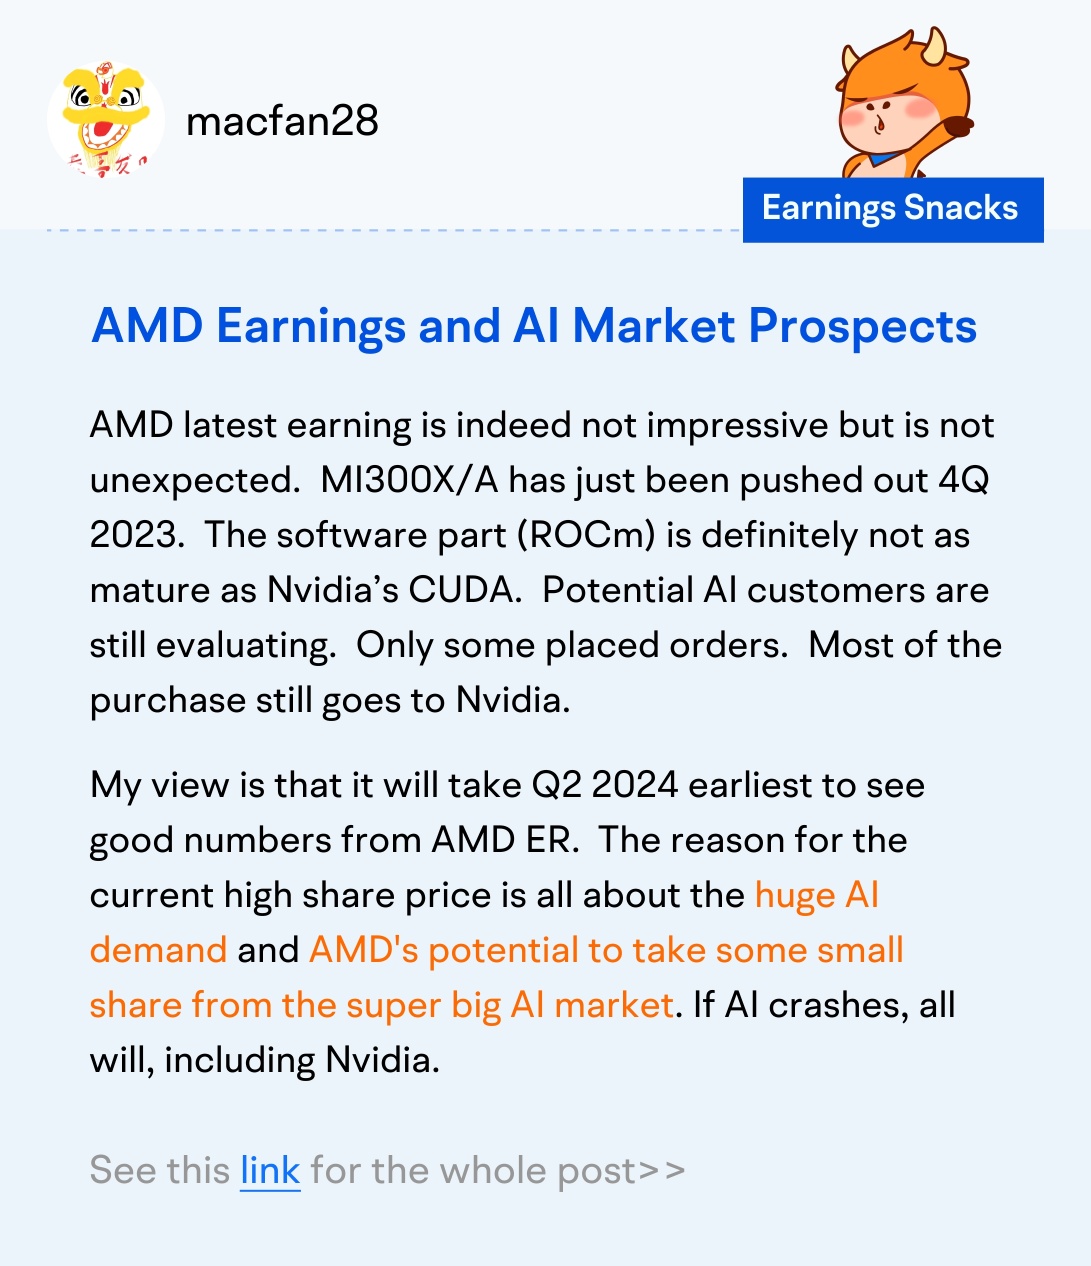 Earnings Snacks: Can investors still benefit from AI mania?